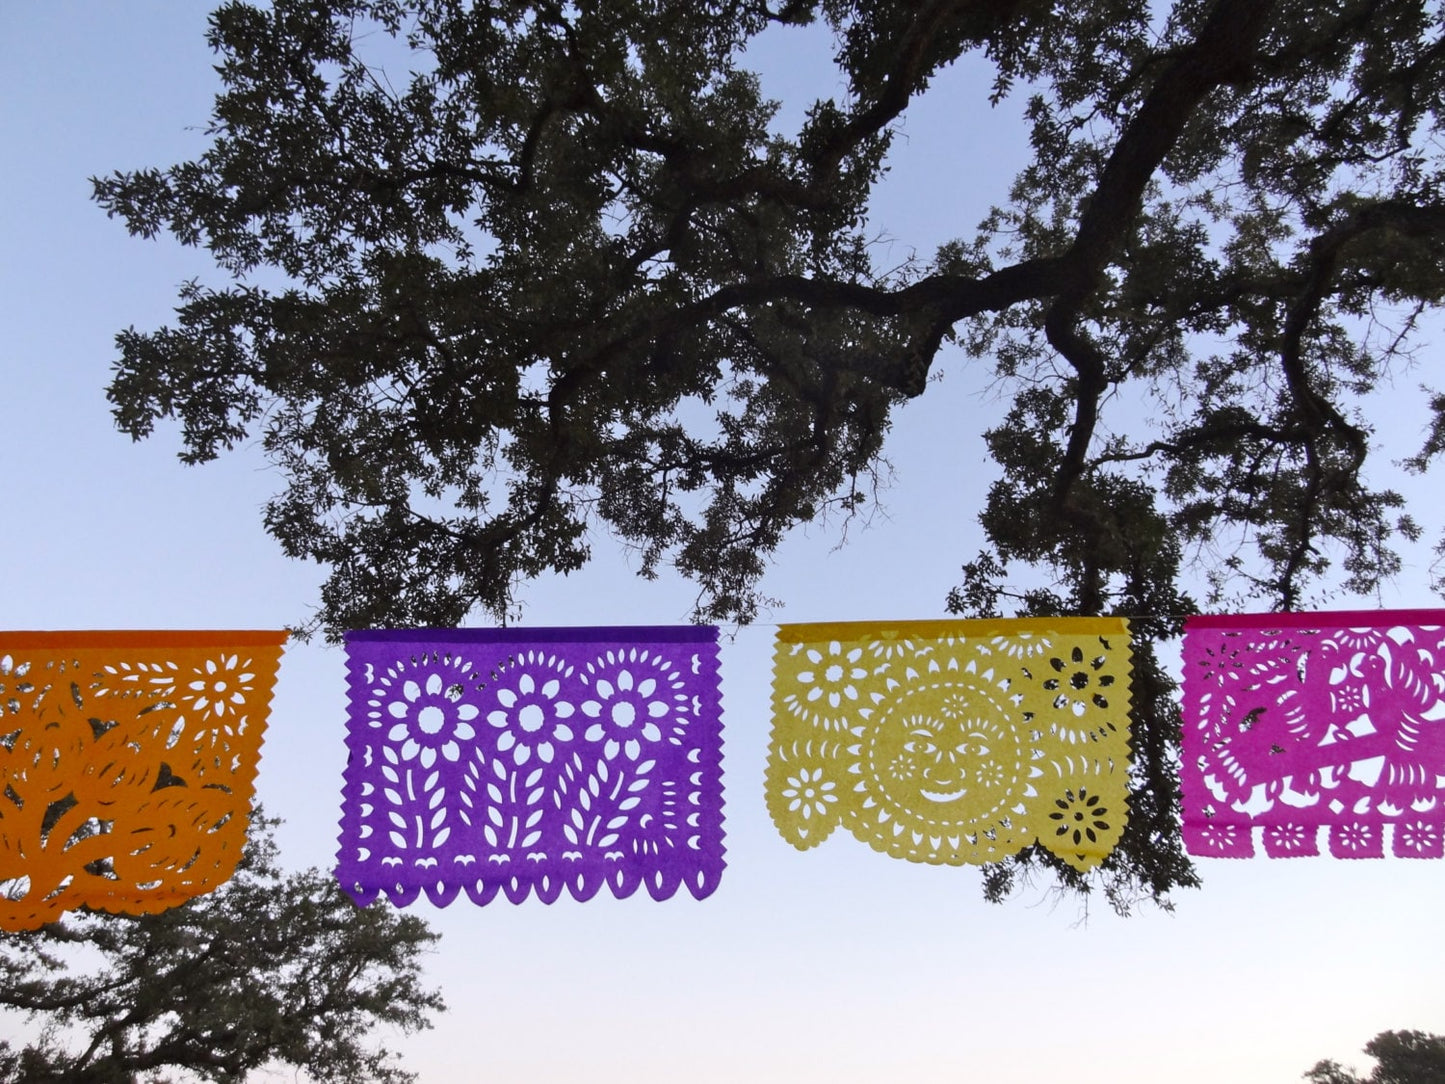 Wedding Decorations Mexican Papel Picado Banners Wedding garlands Fiesta Bridal Shower Rehearsal Dinner Anniversary decor 5 pack 100 ft